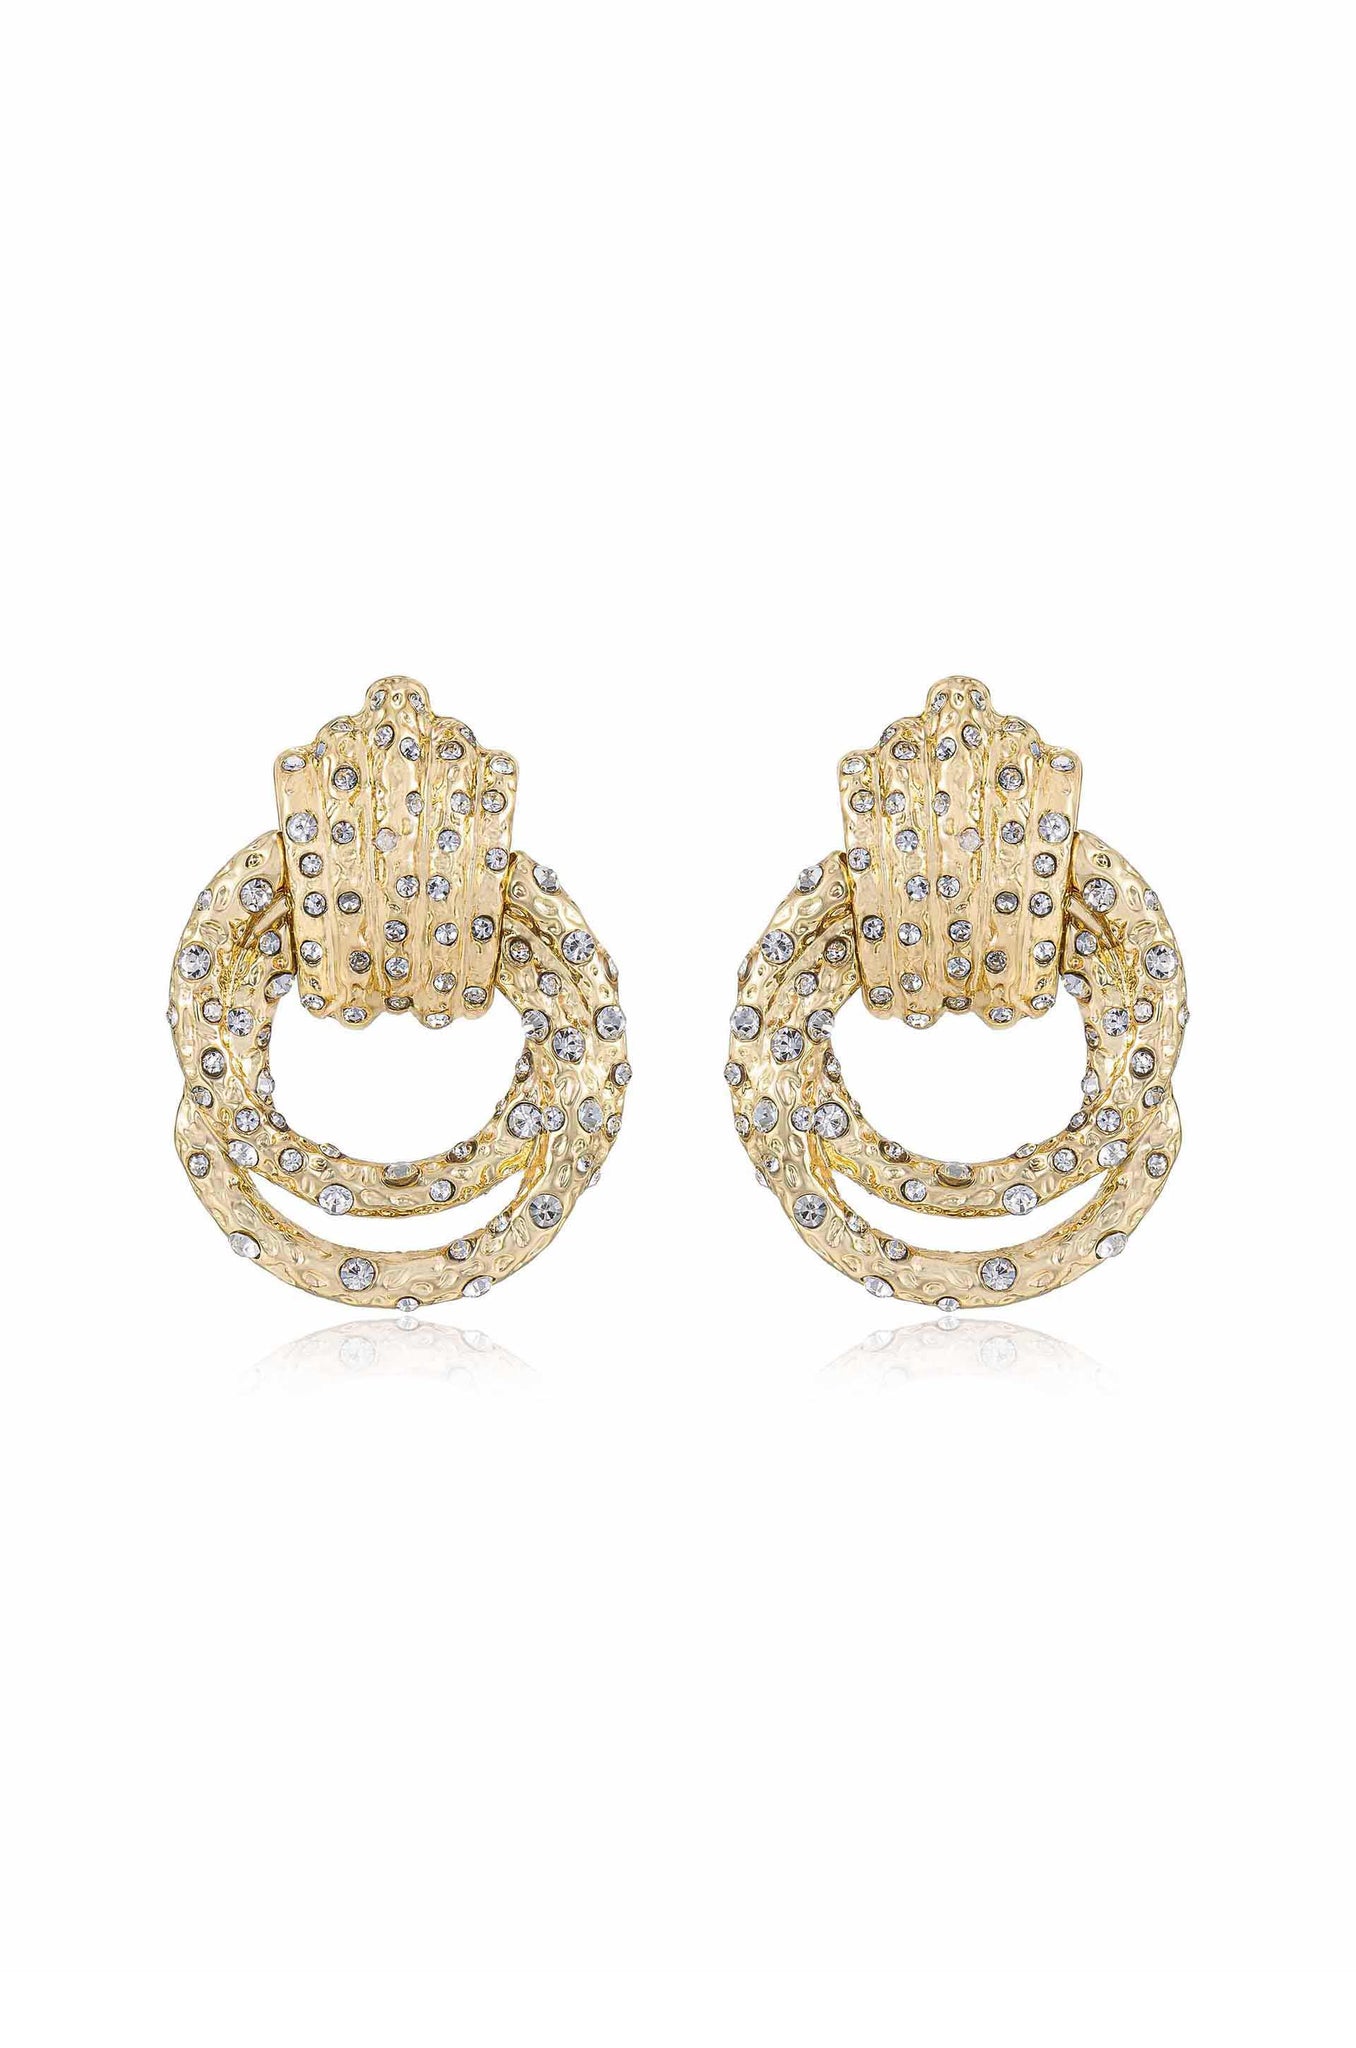 Only Royalty 18k Gold Plated Crystal Earrings